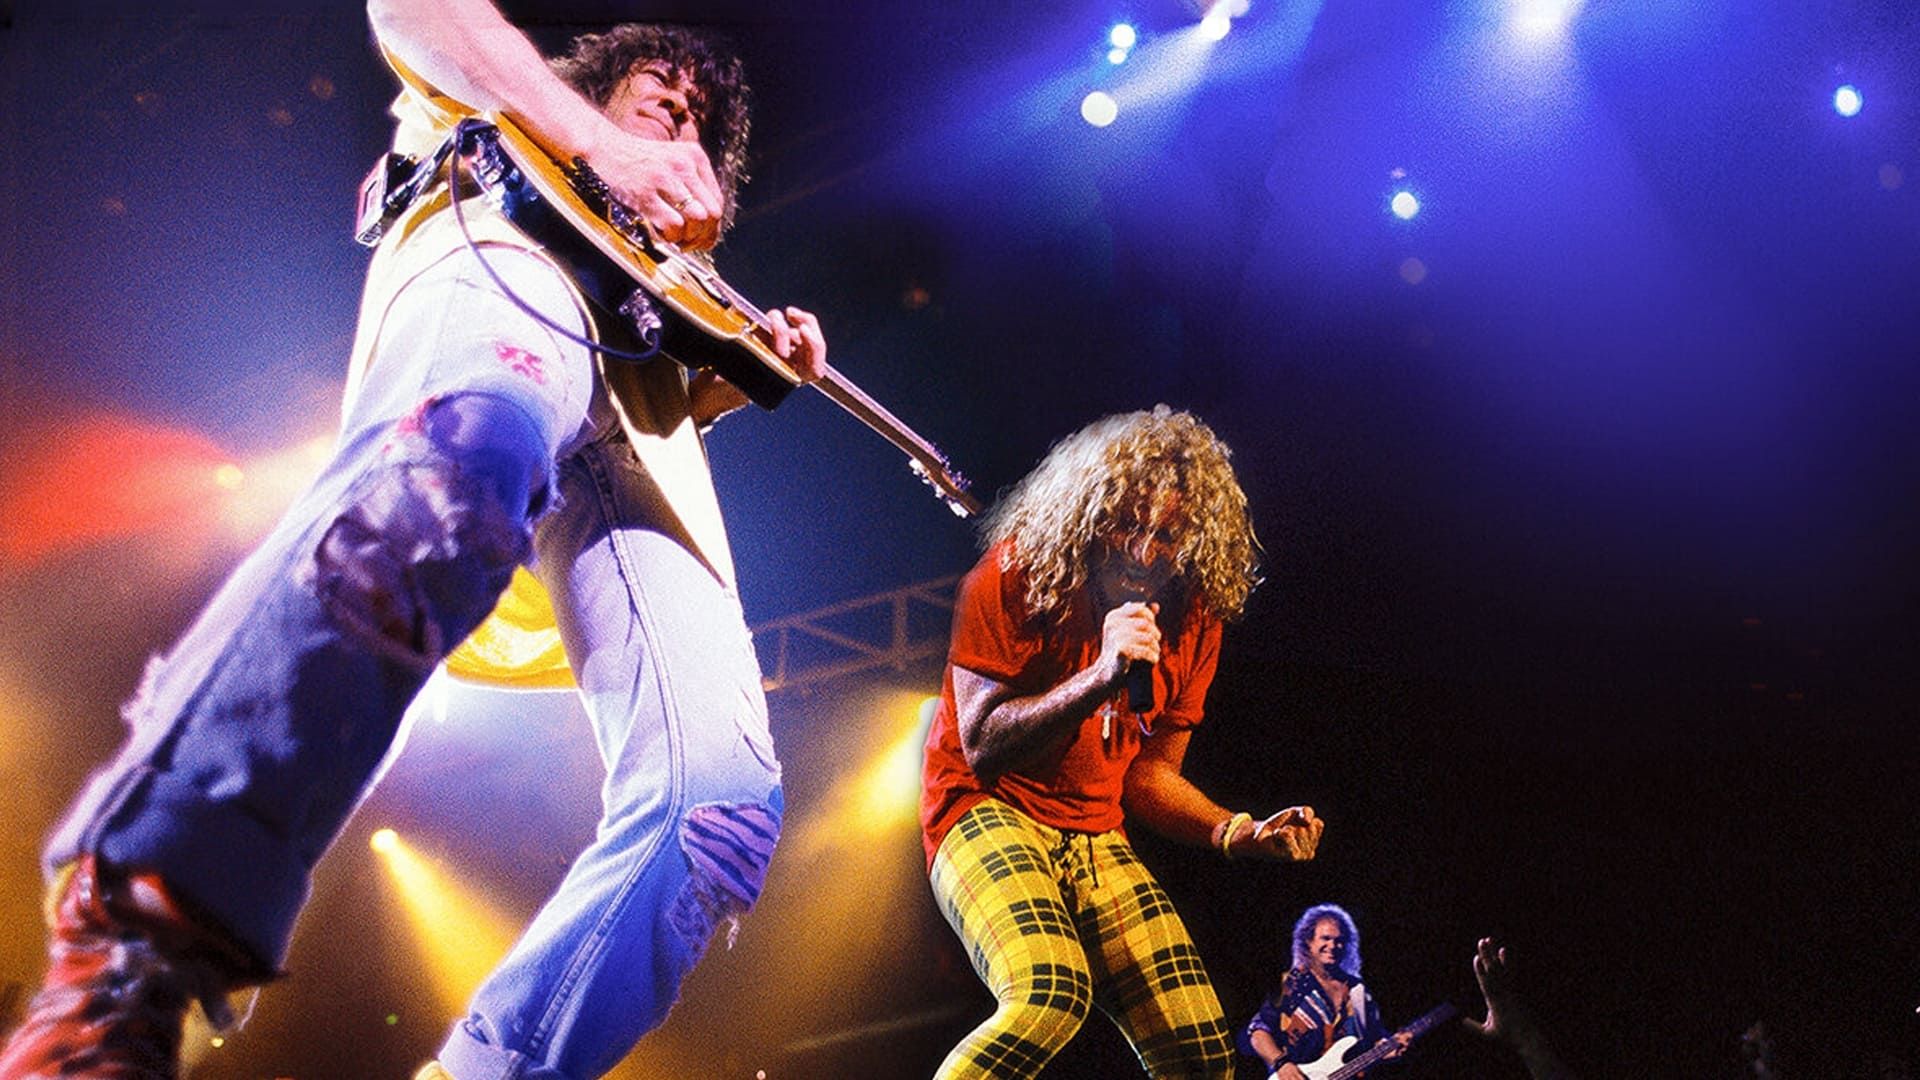 Van Halen Live: Right Here, Right Now background